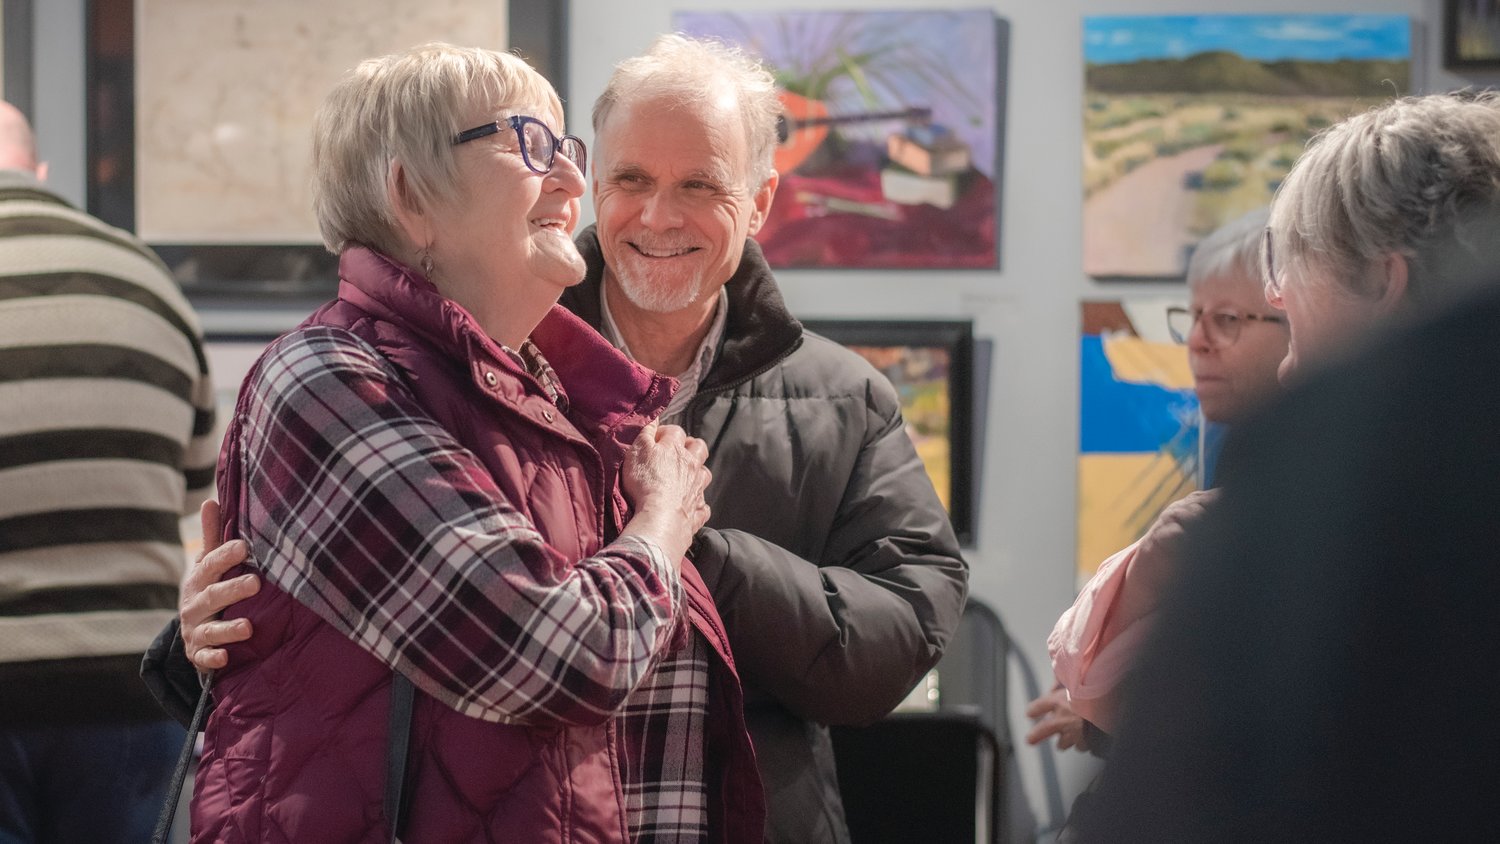 Edna Fund and Max Vogt greet each other during a young artist show and exhibition at the Rectangle Gallery & Creative Space Friday in Centralia.